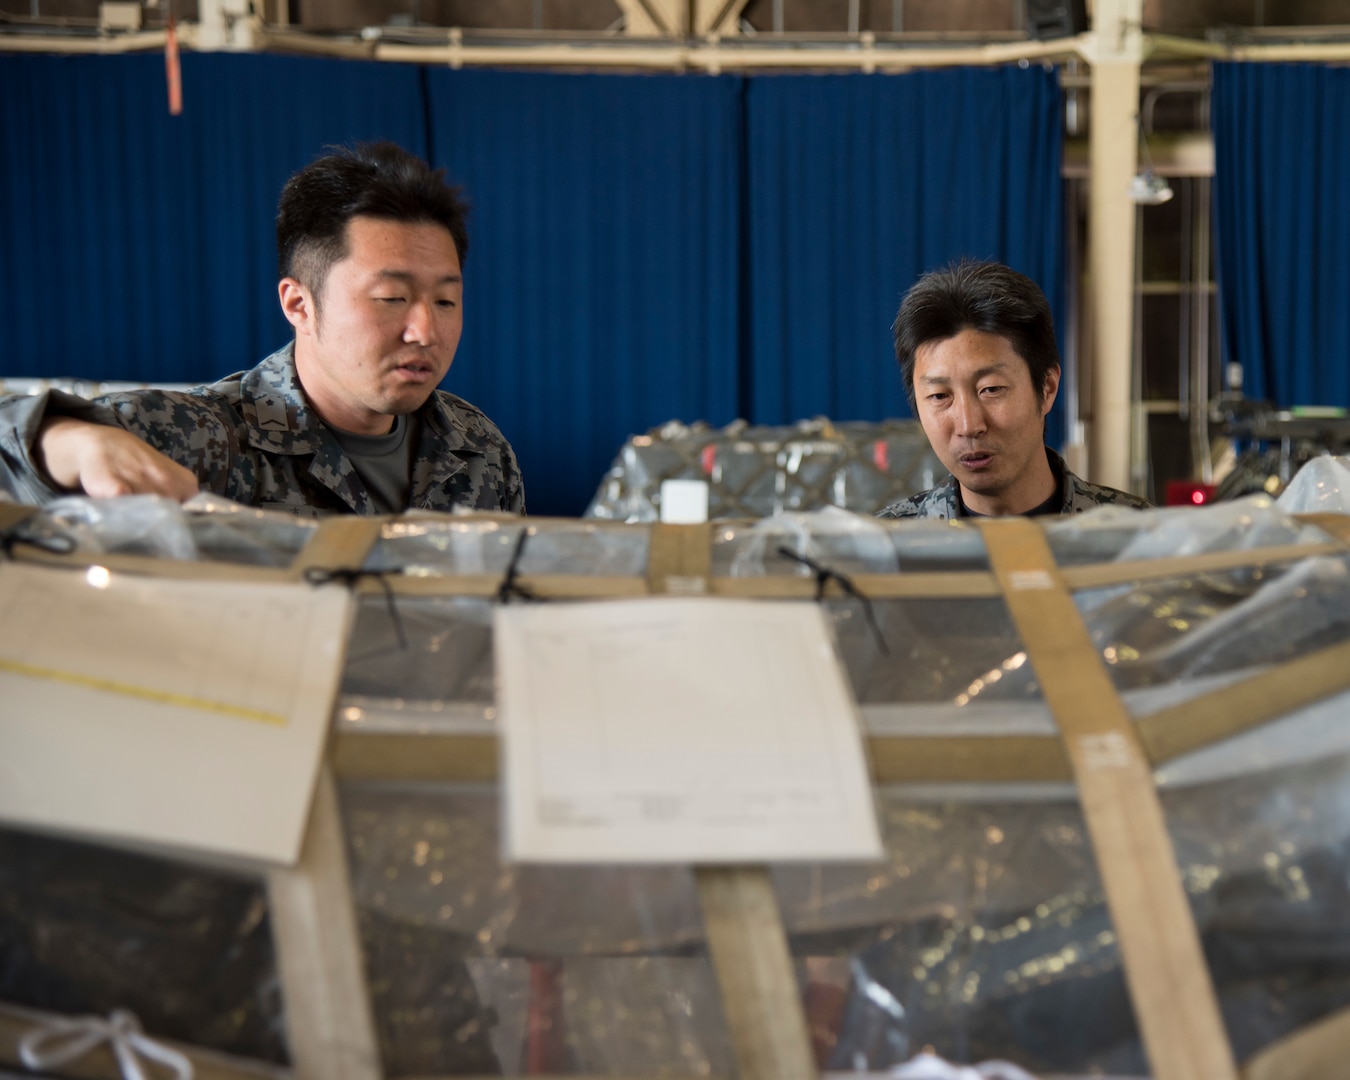 Two Japan Air Self-Defense Force airborne warning and control system supply transporters inspect supplies for exercise RED FLAG-Alaska 19-2 at Misawa Air Base, Japan, May 25, 2019. Both JASDF and U.S. Air Force logistic team members worked together in loading the supplies before attending the Red Flag exercise. (U.S. Air Force photo by Branden Yamada)